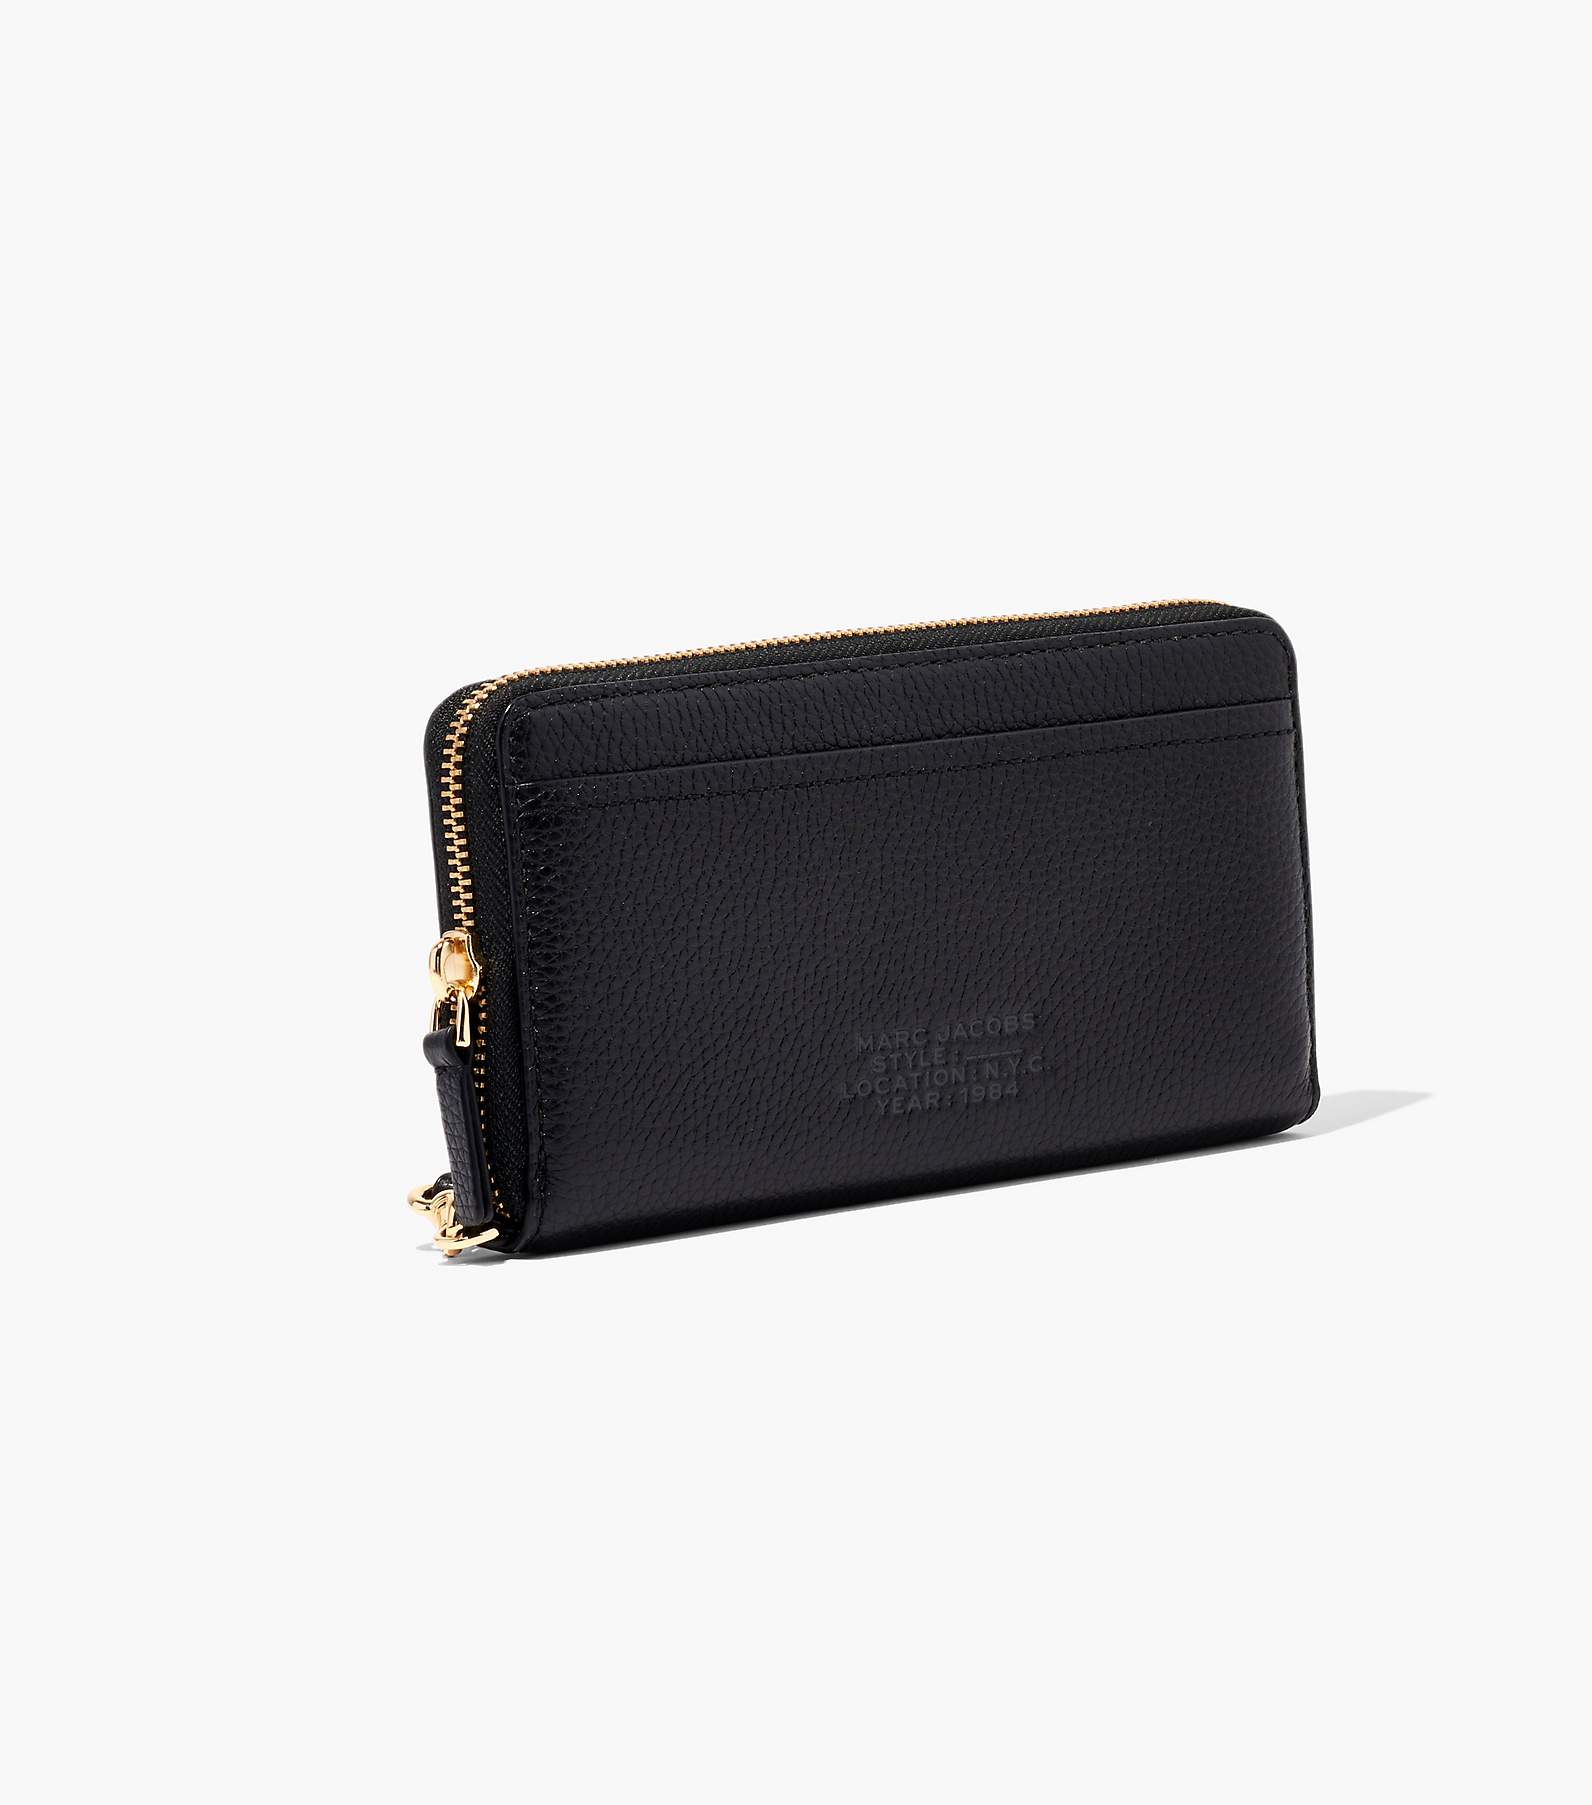 Marc Jacobs Round Grained Leather Coin Purse in Black